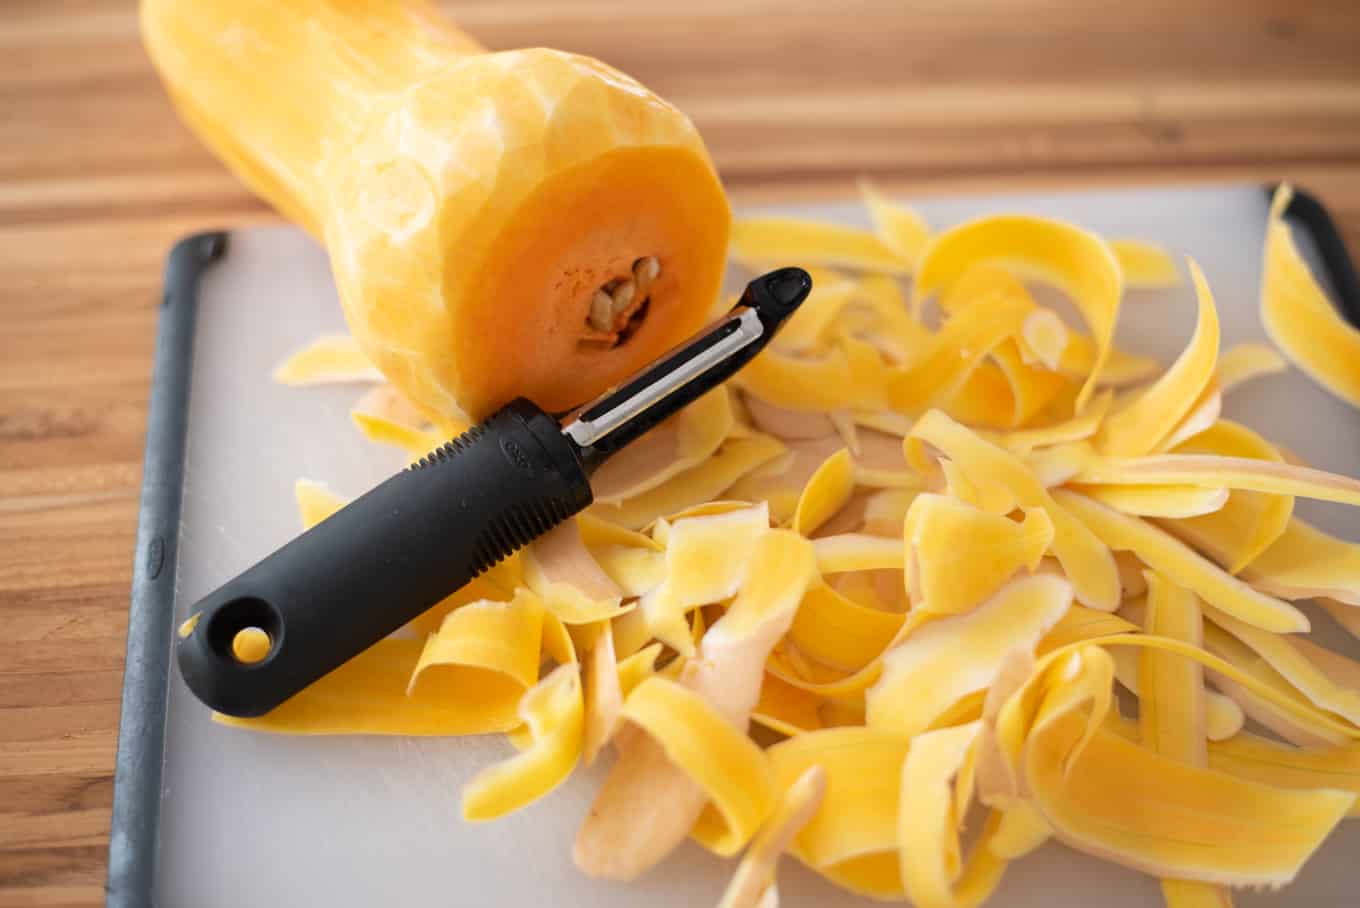 A peeled butternut squash, a vegetable peeler, and peeled scraps on a cutting board.